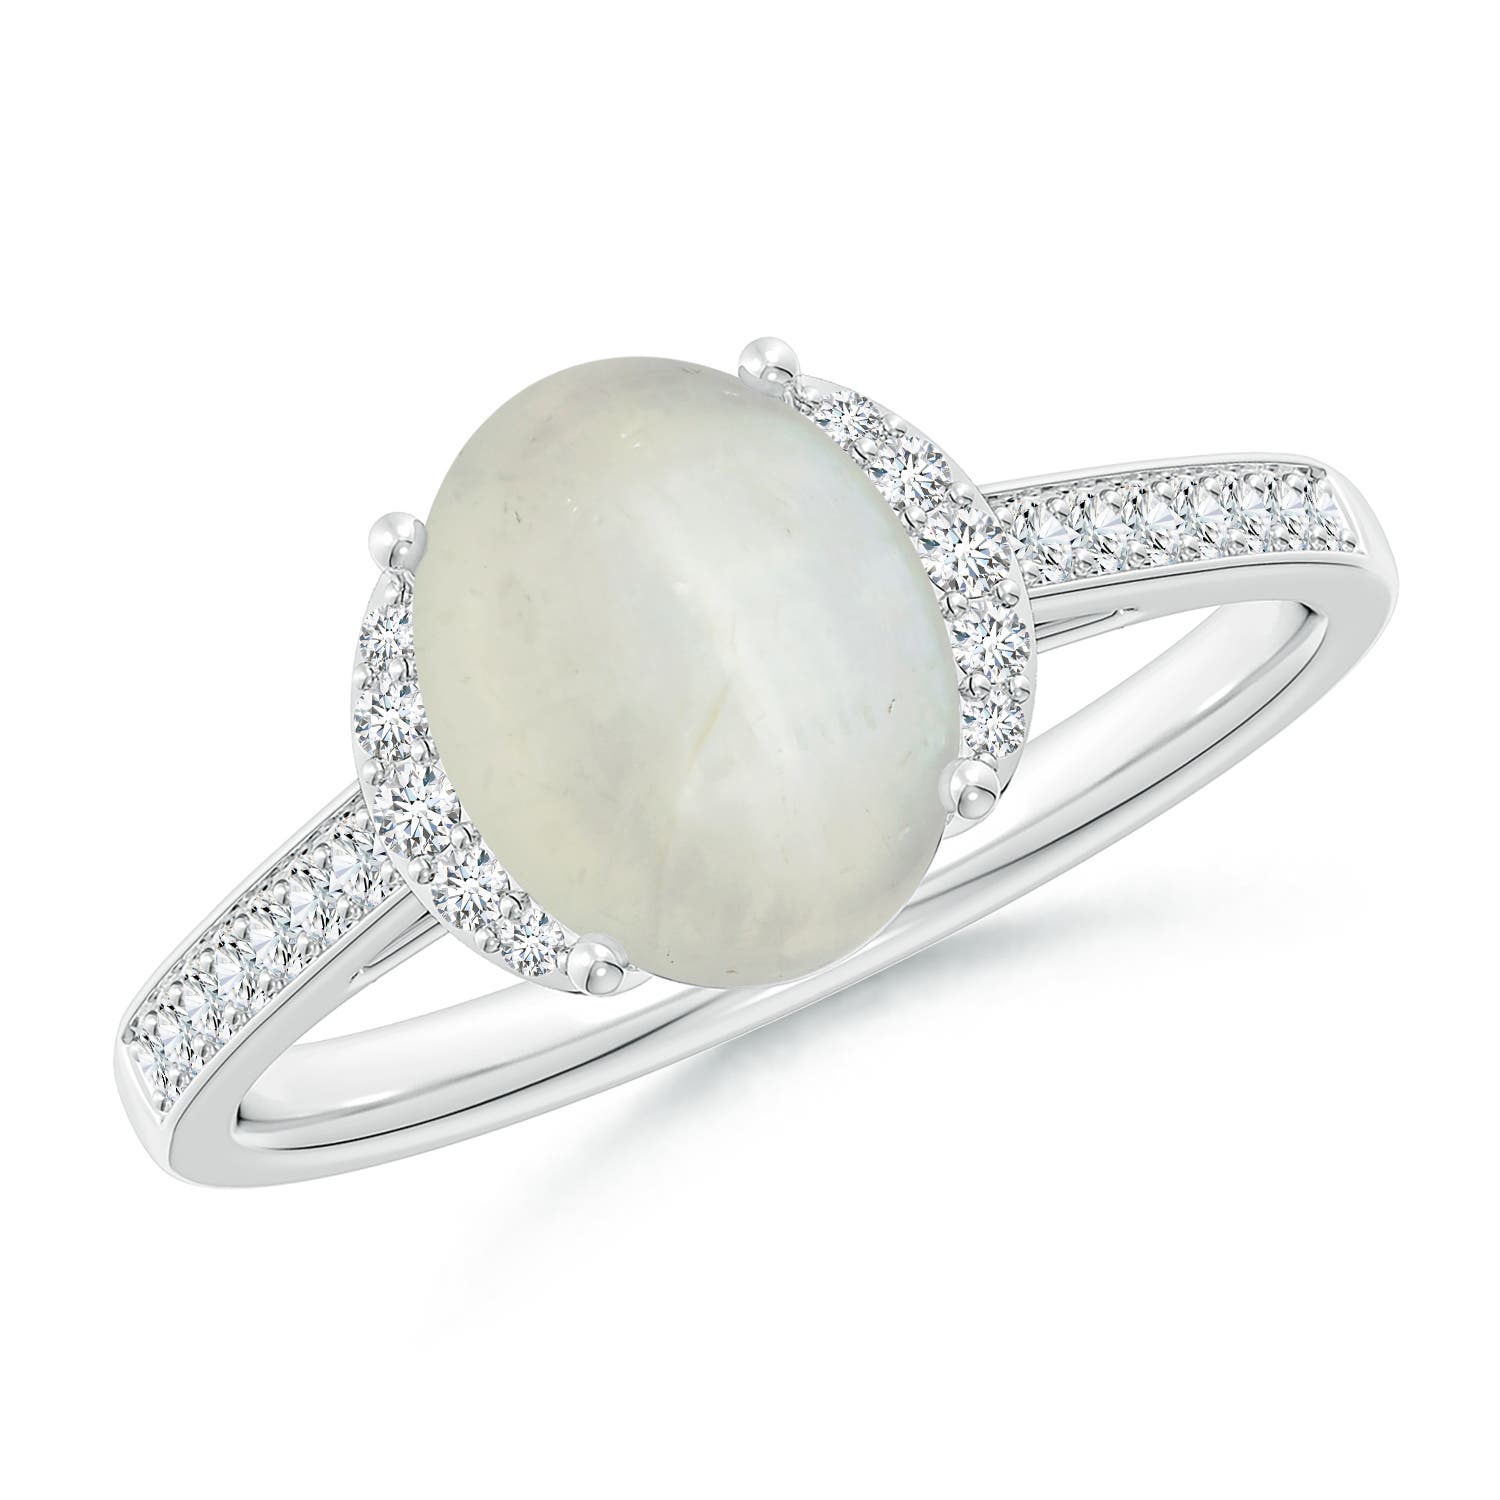 AA - Moonstone / 1.88 CT / 14 KT White Gold